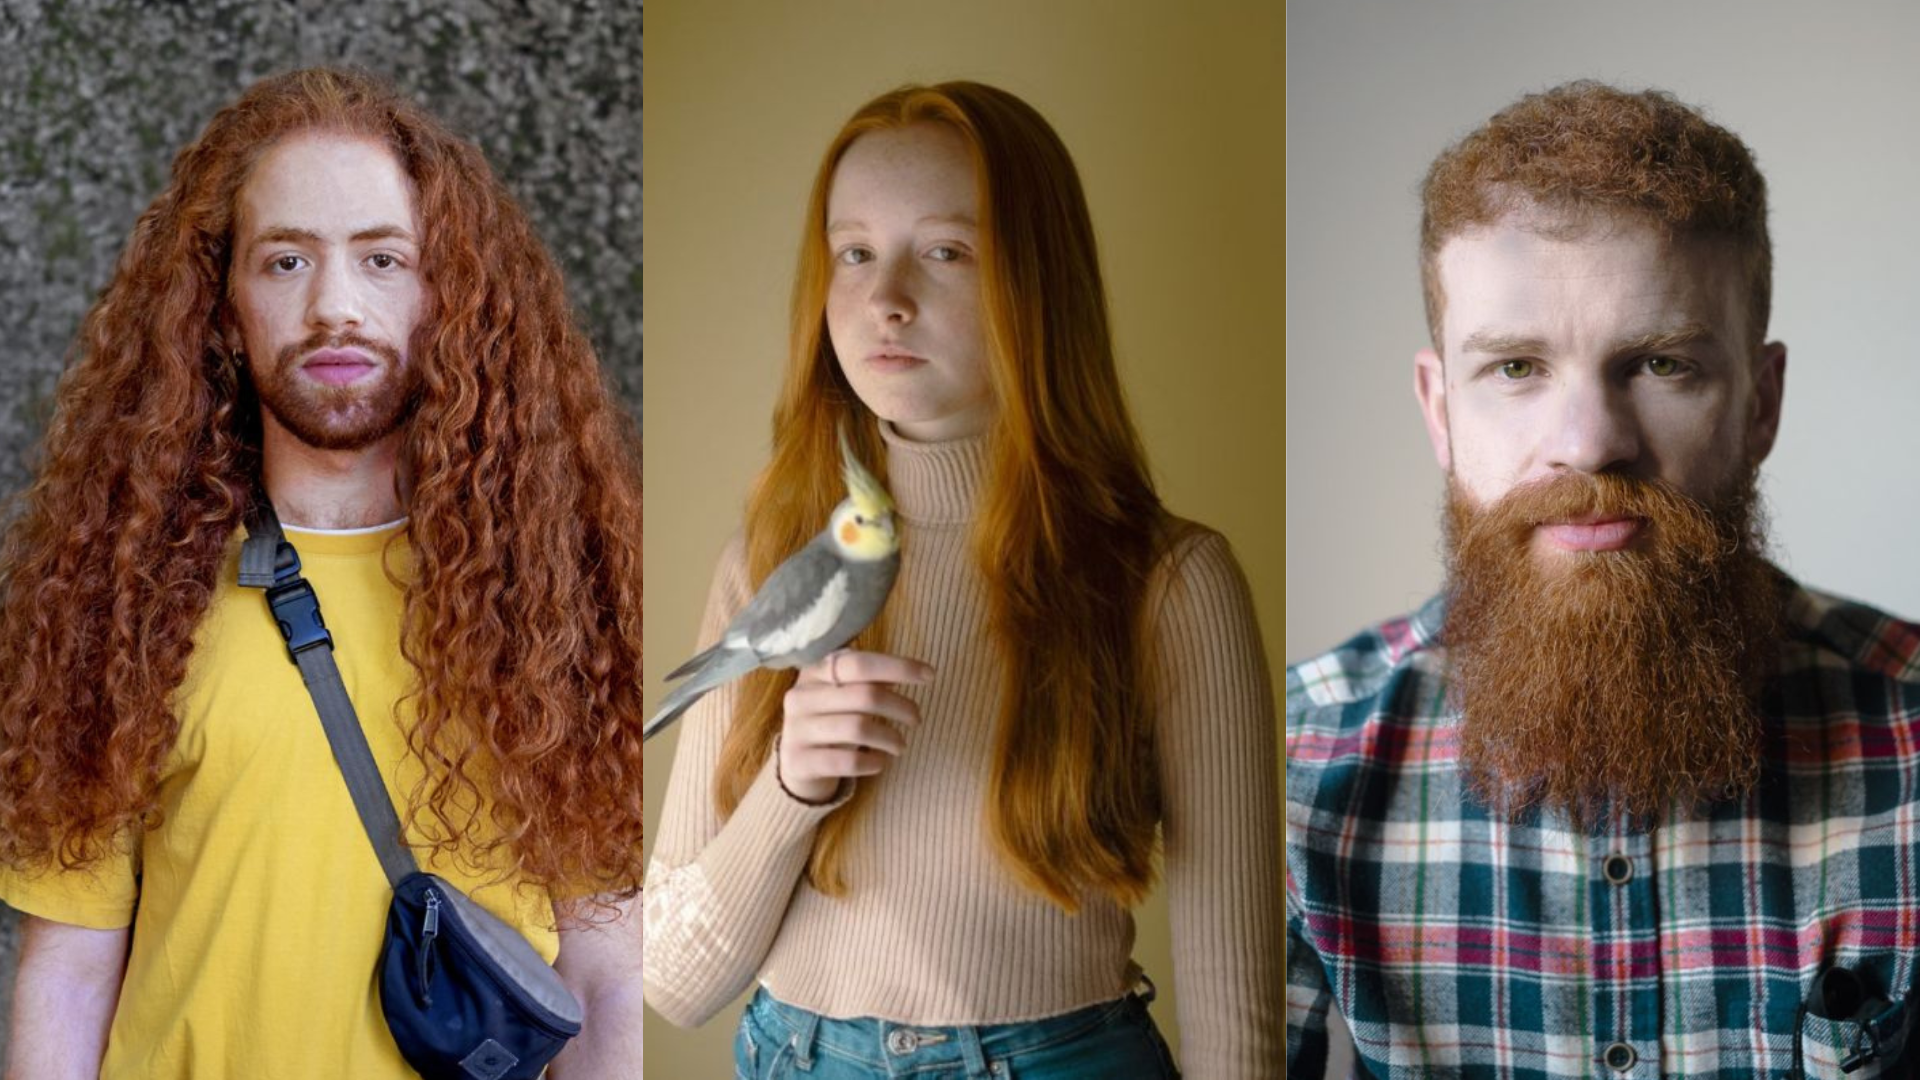 “Fado Ruivo”: Photographer Releases Entire Series About Redheads in Portugal